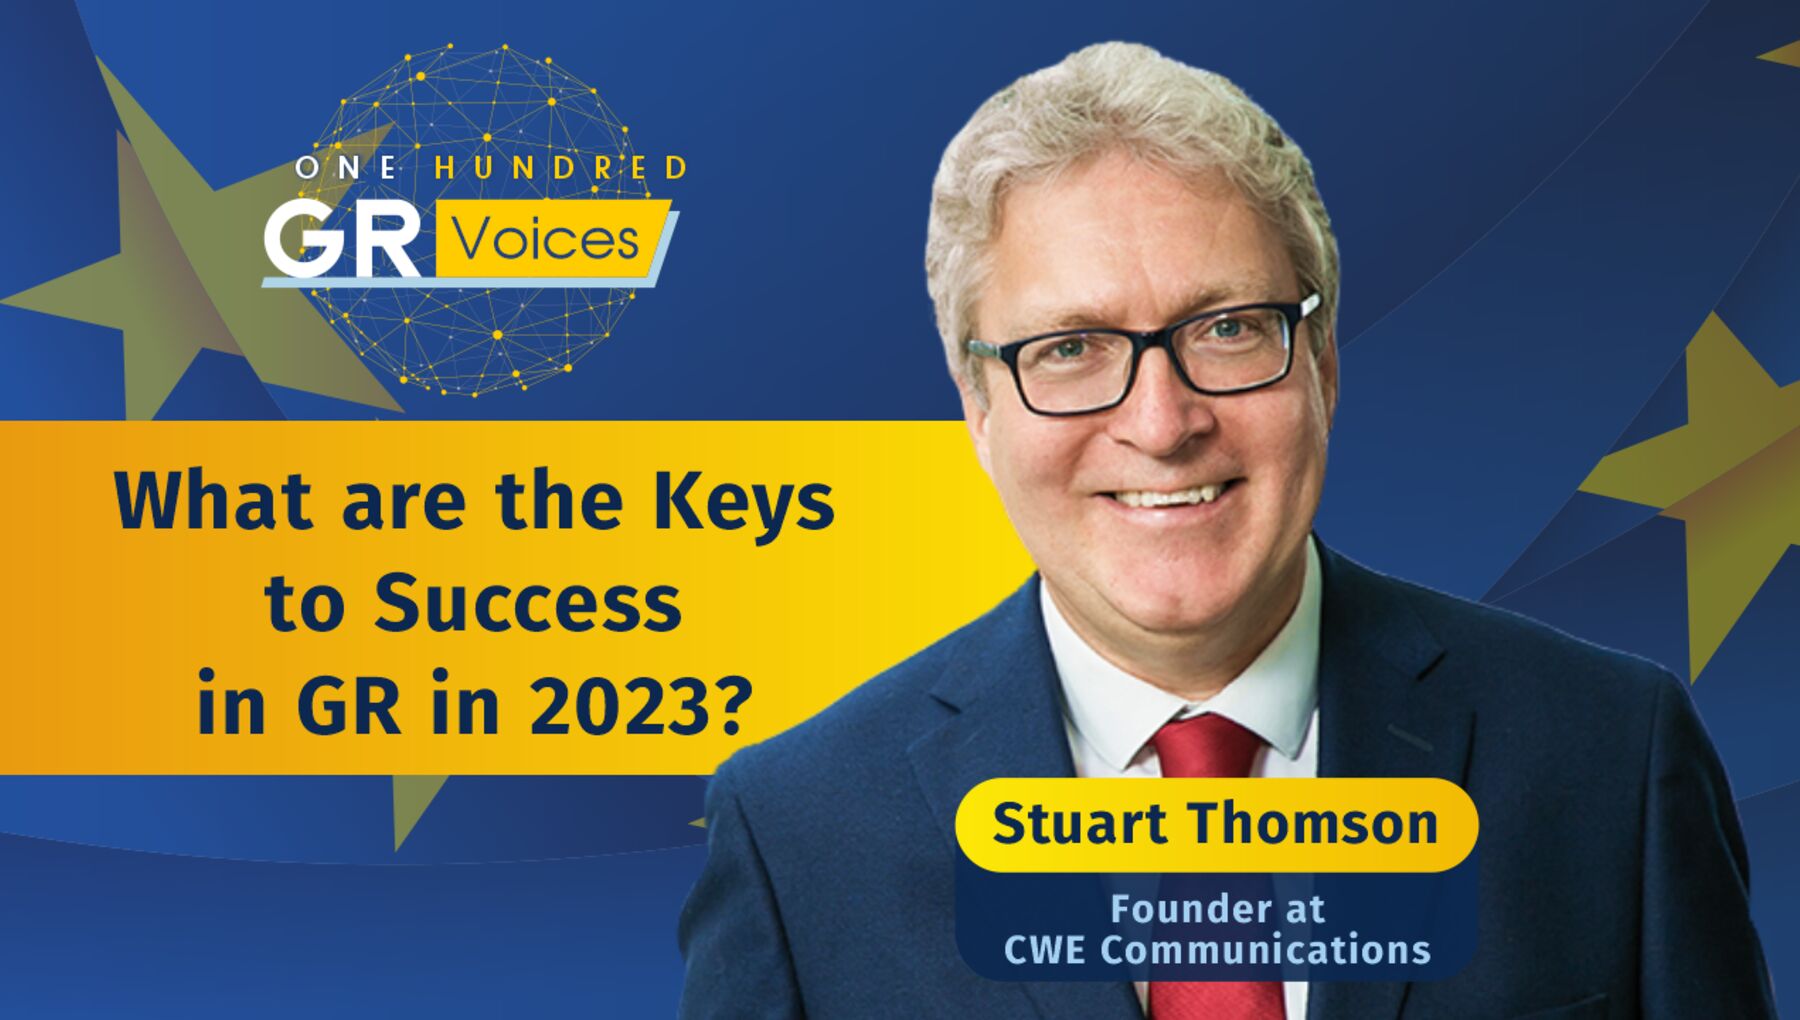 2️⃣ What are the Keys to Success in GR in 2023? - Stuart Thomson | One Hundred GR Voices